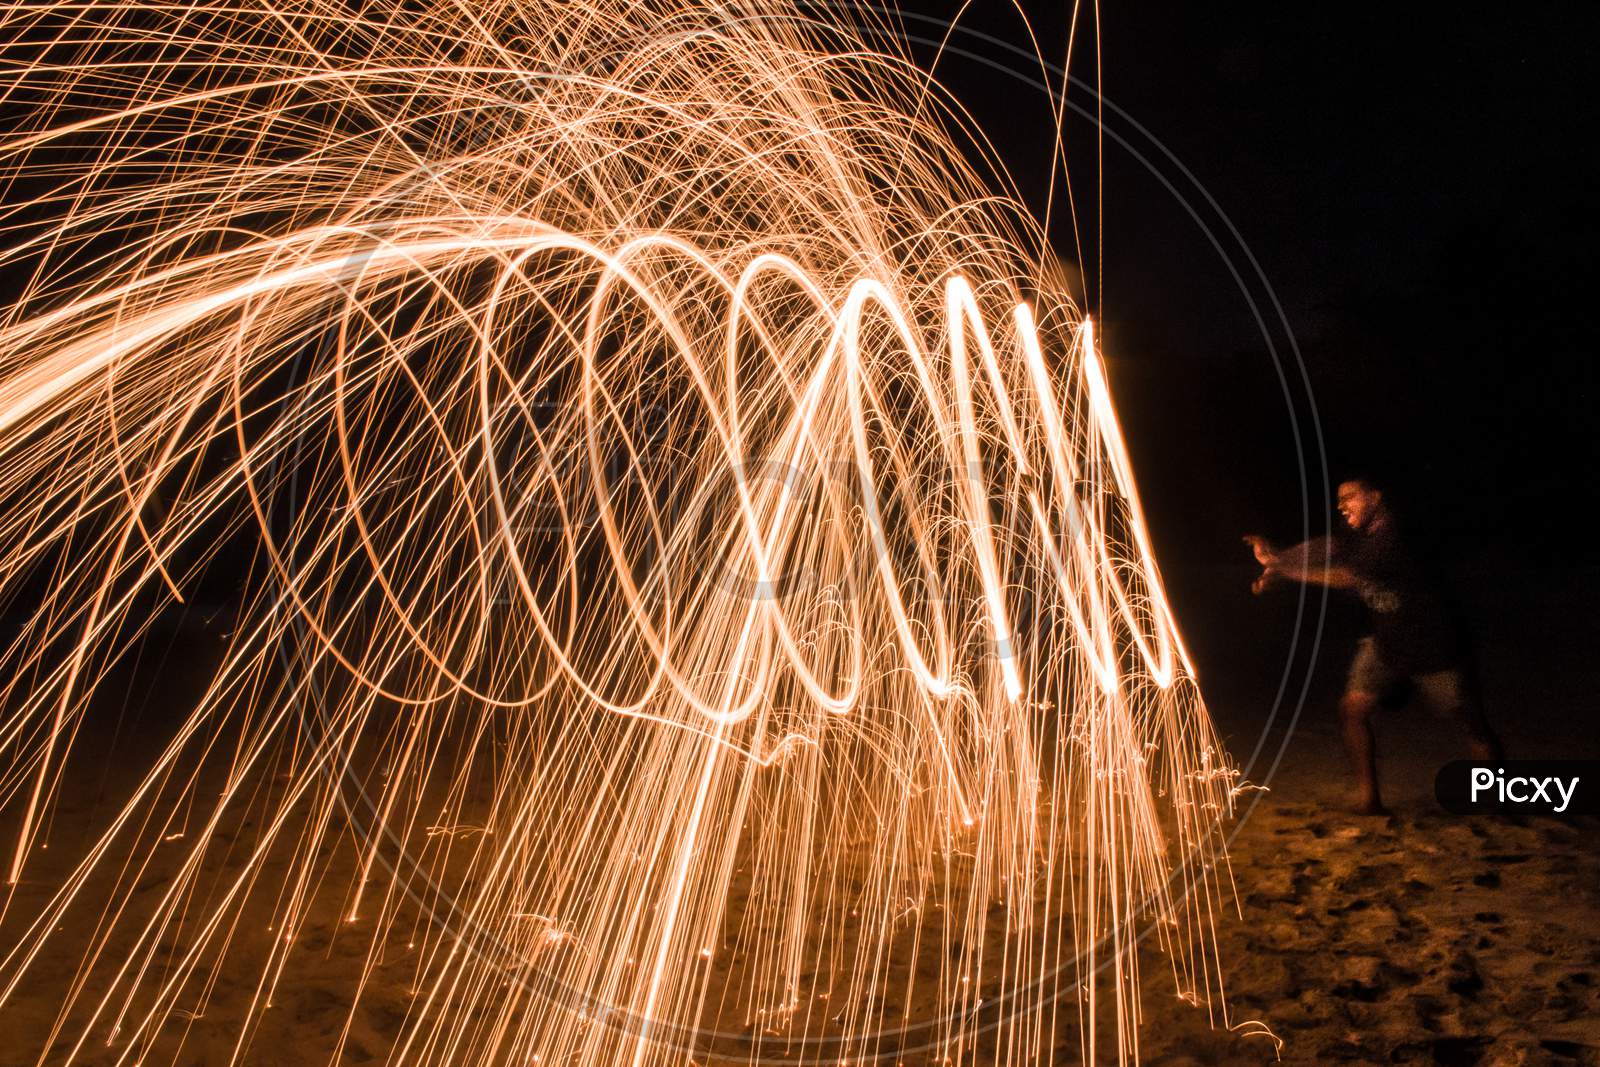 Playing with Steelwool